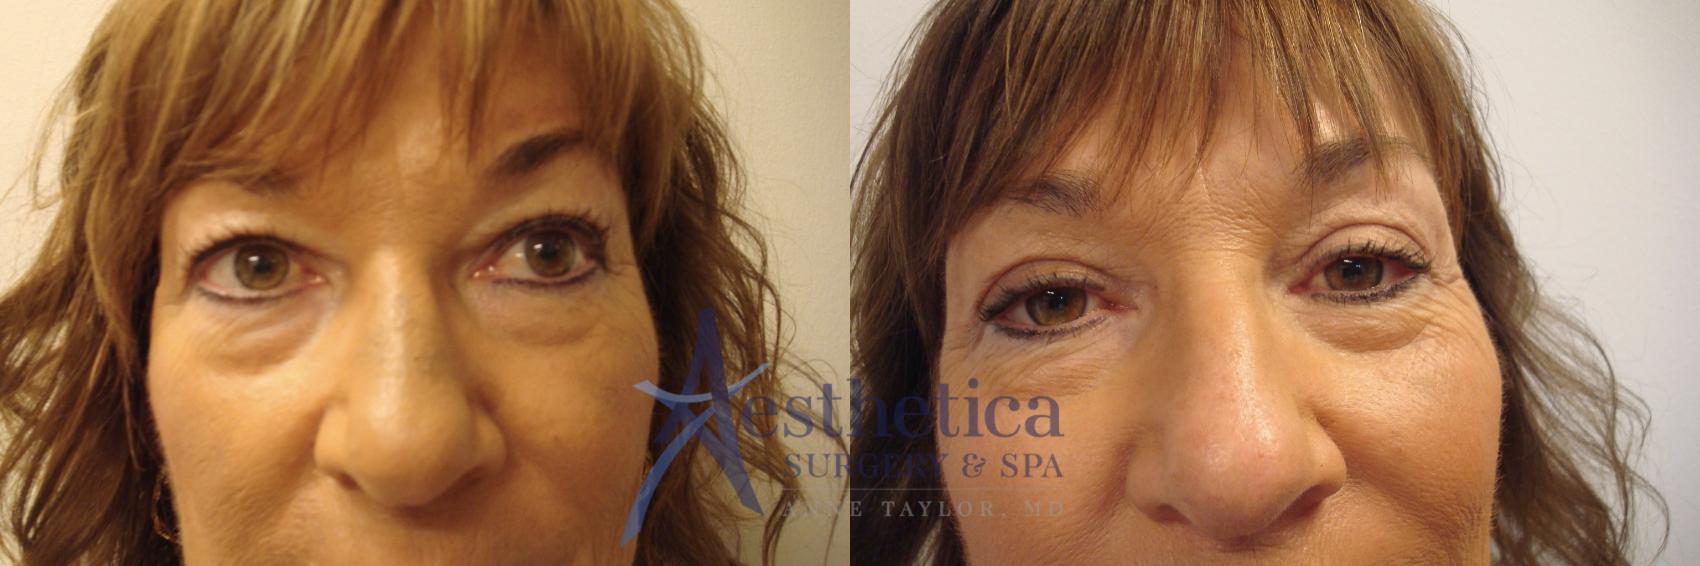 Blepharoplasty (Eyelid Surgery) Case 658 Before & After Front | Columbus, OH | Aesthetica Surgery & Spa